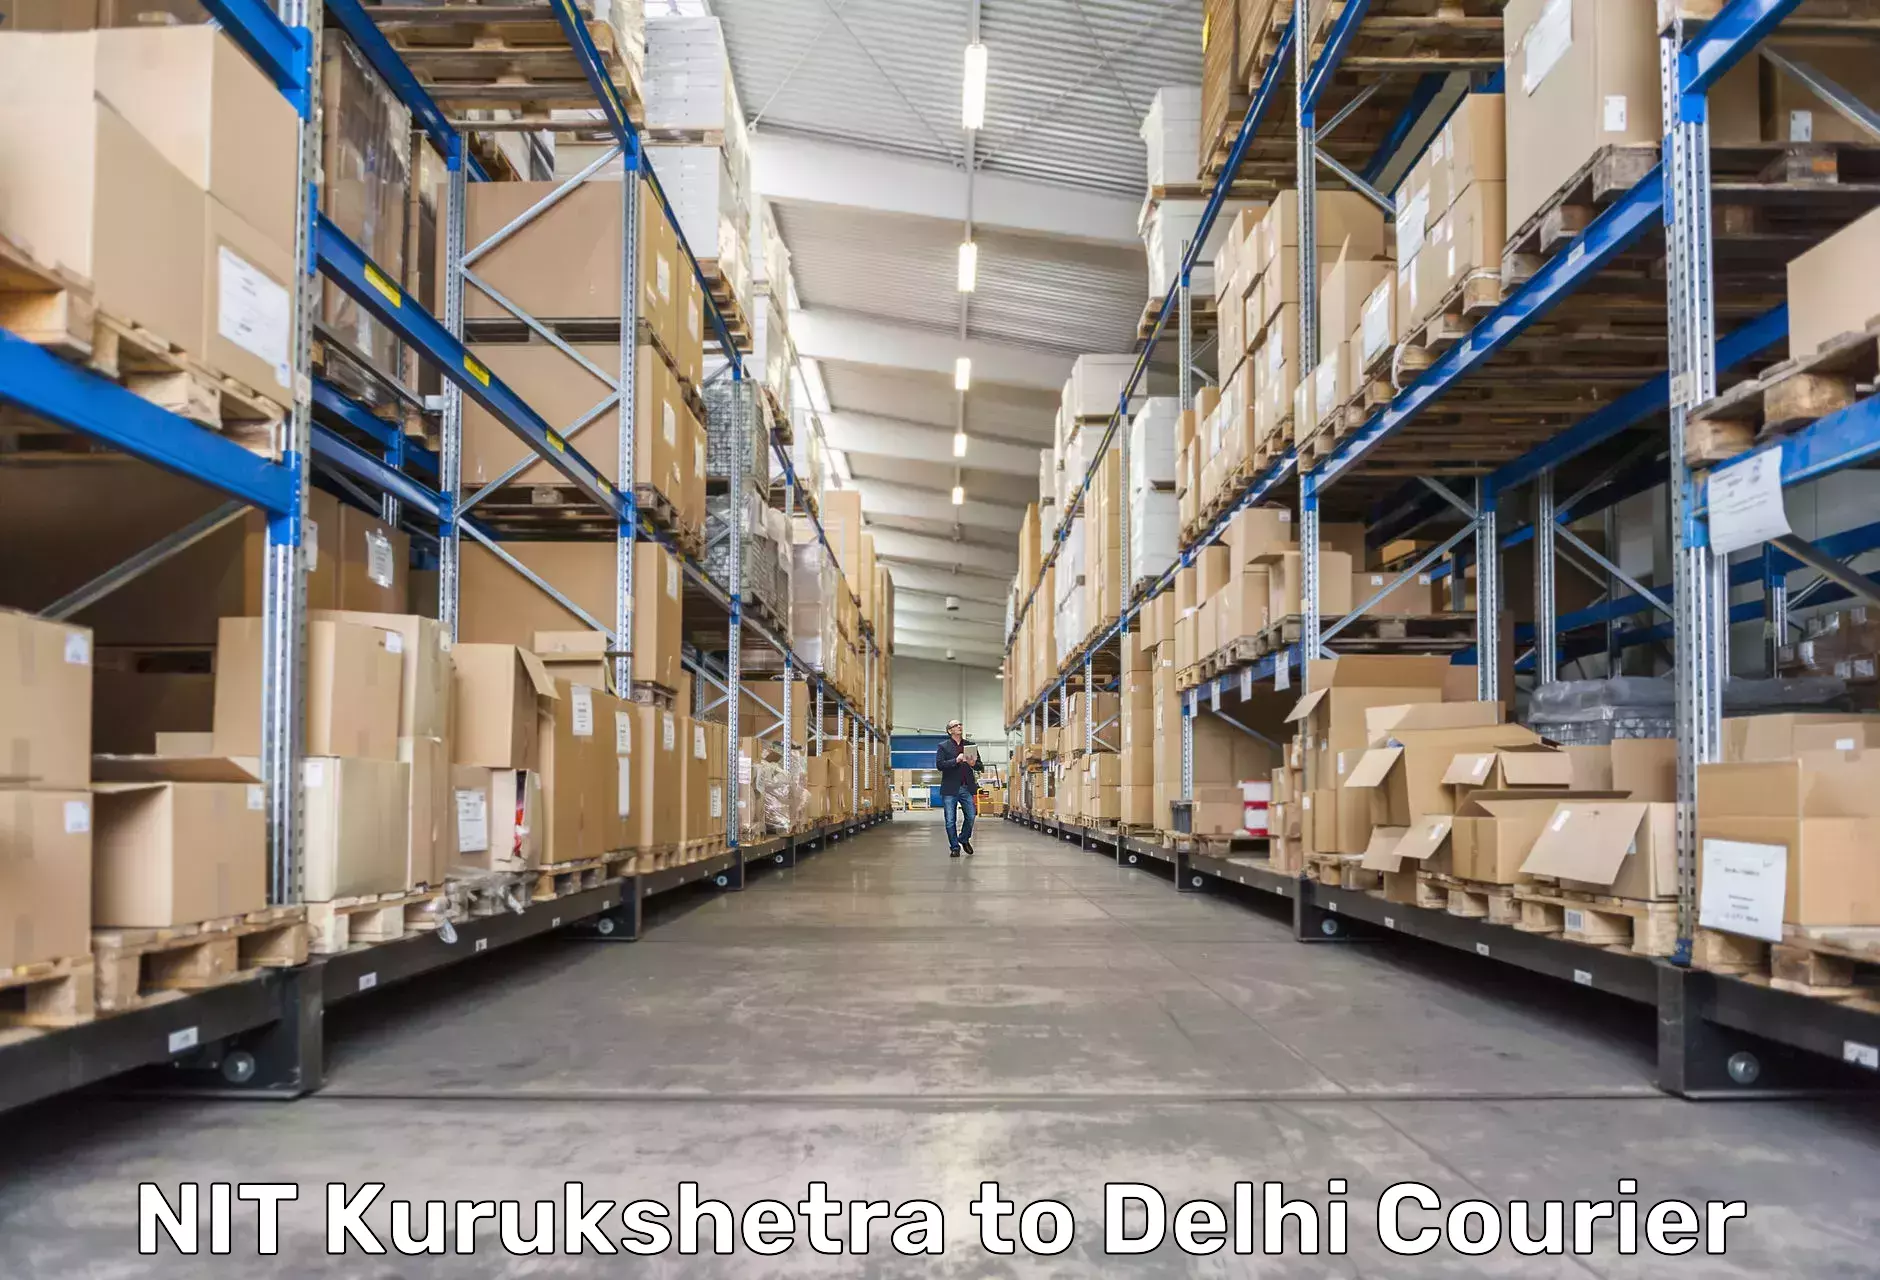 Express package delivery in NIT Kurukshetra to East Delhi